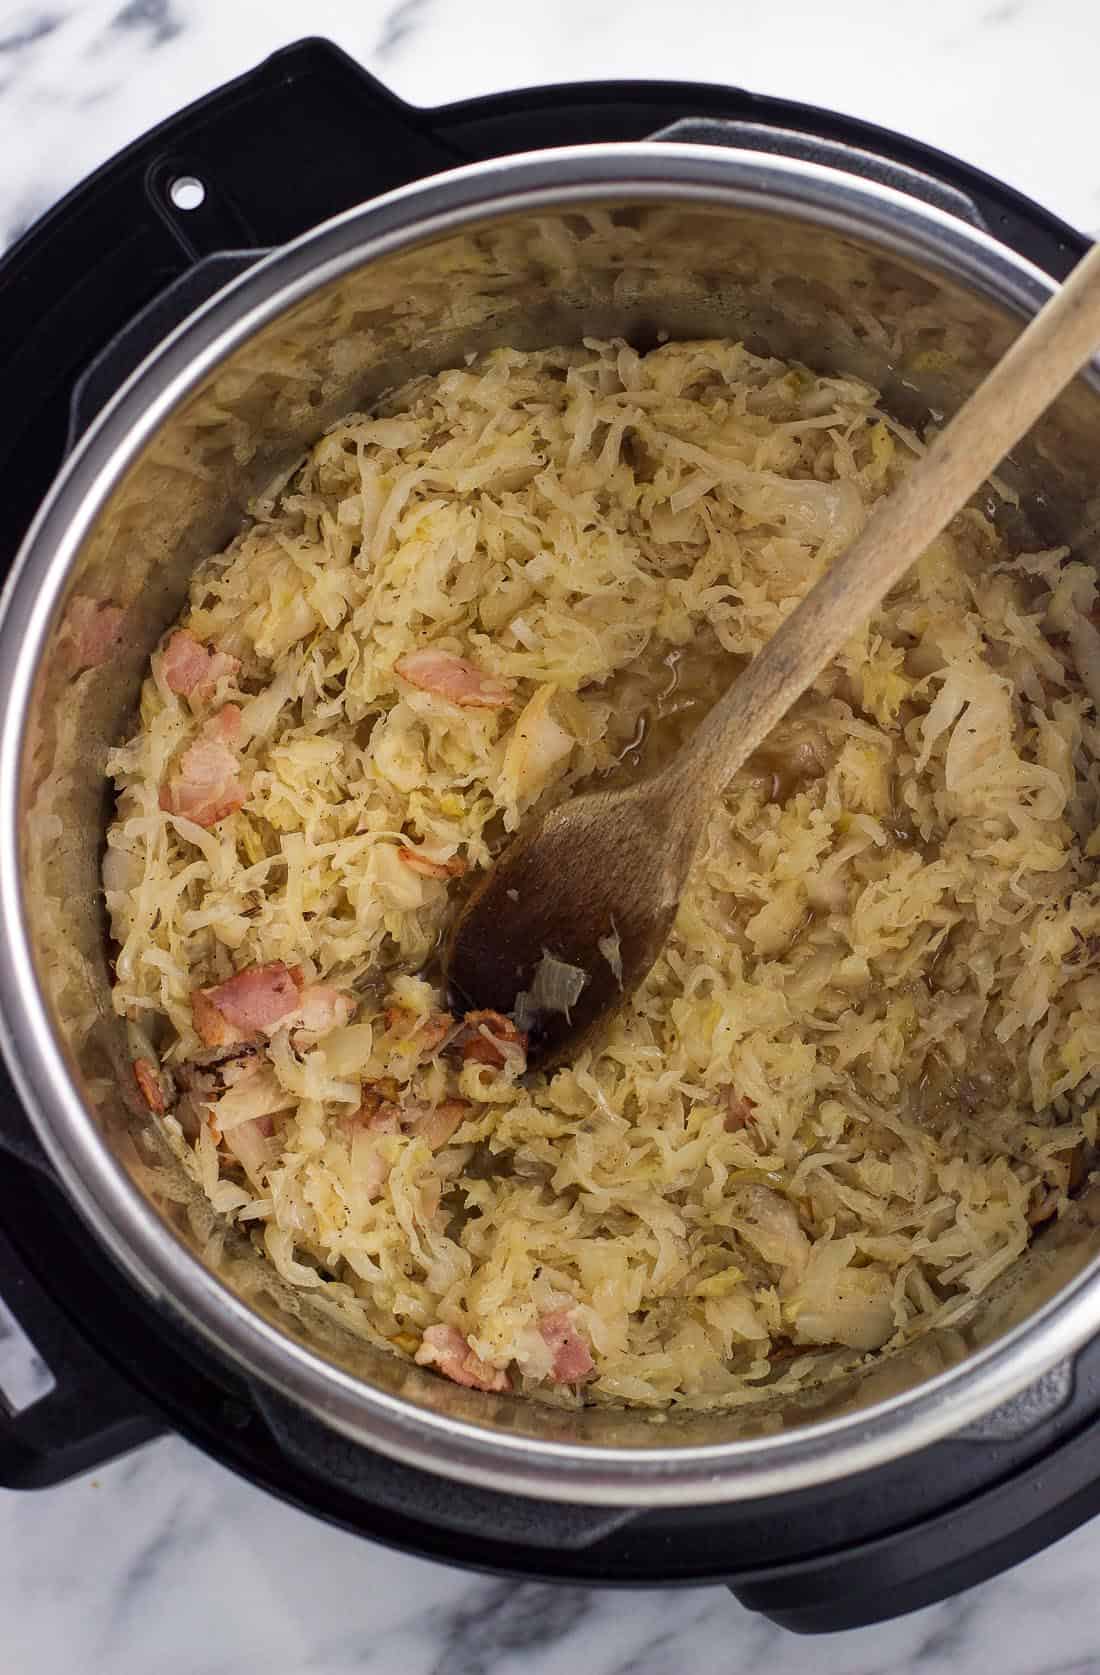 Cooked sauerkraut in the Instant Pot with a wooden spoon